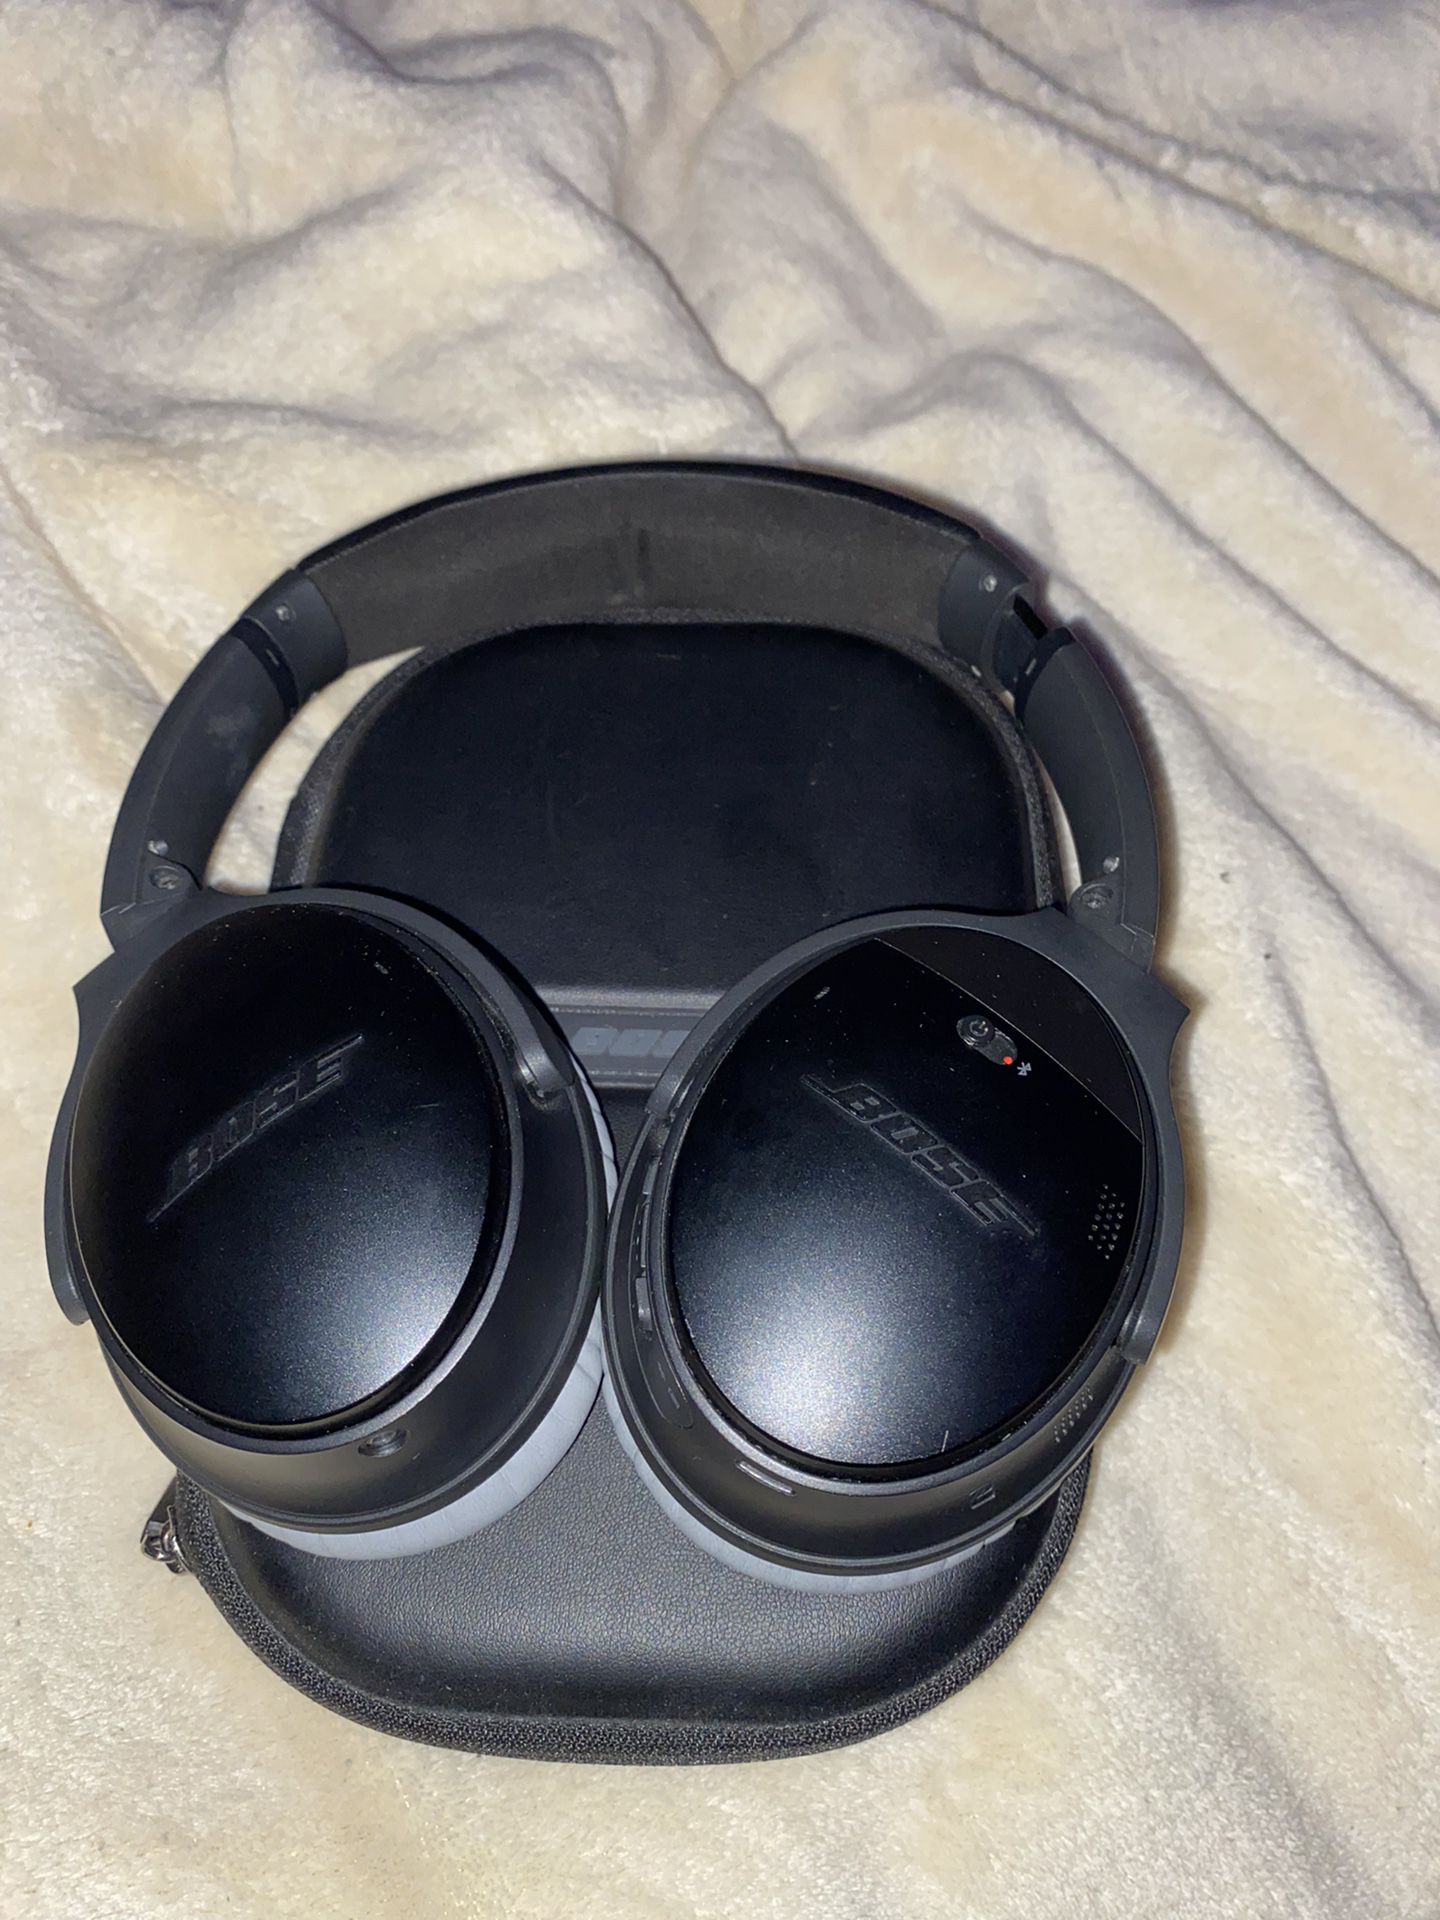 Bose QC35 Black With Grey Ear Pads